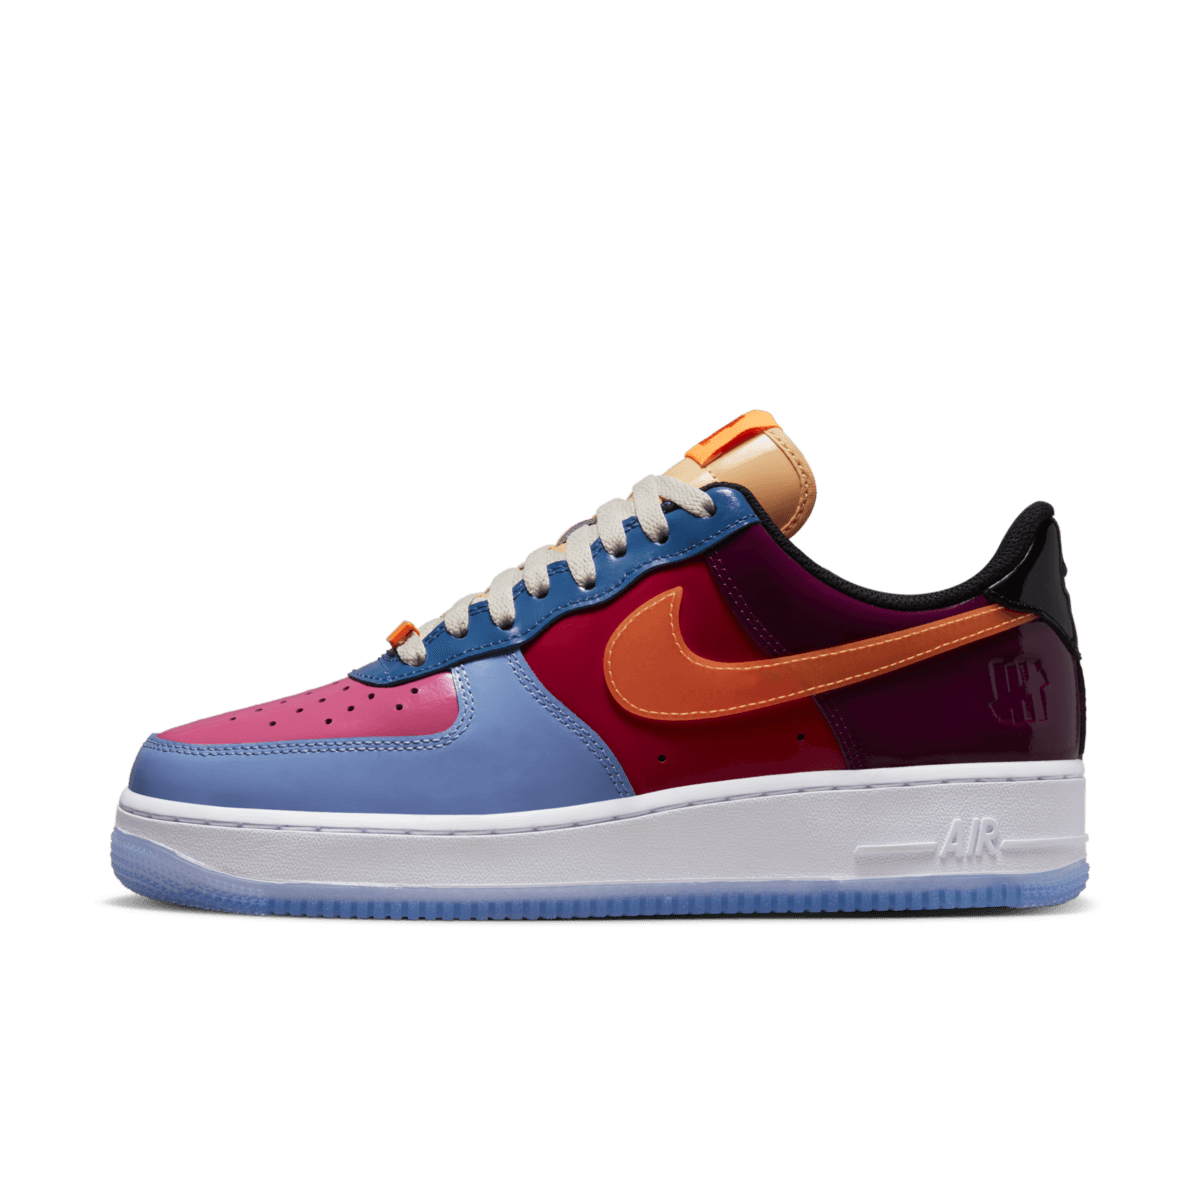 UNDEFEATED x Nike Air Force 1 Low 'Multi-Patent' DV5255-400